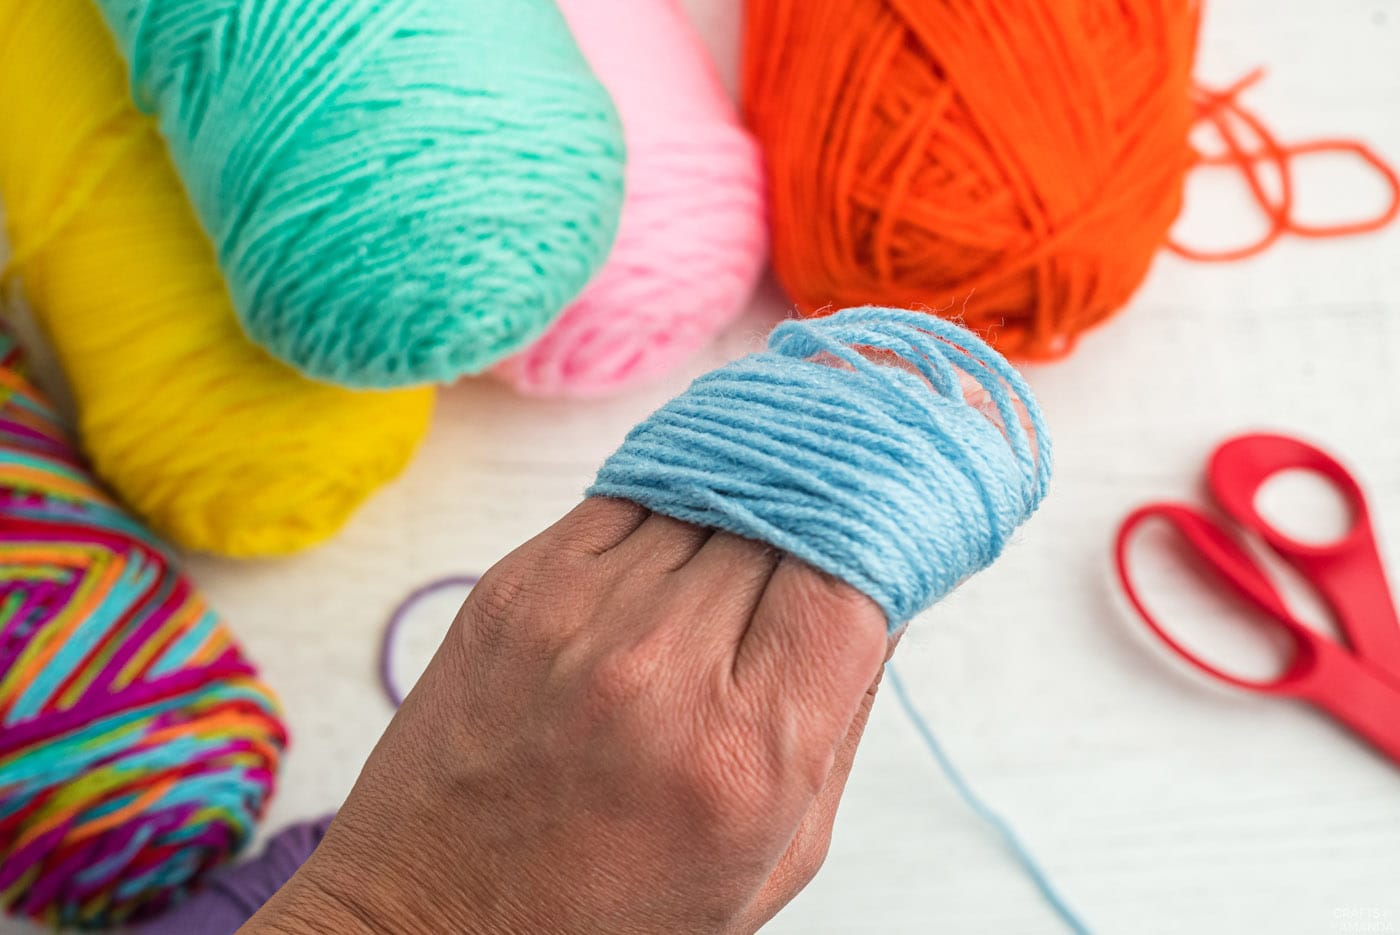 wrapping blue yarn around fingers